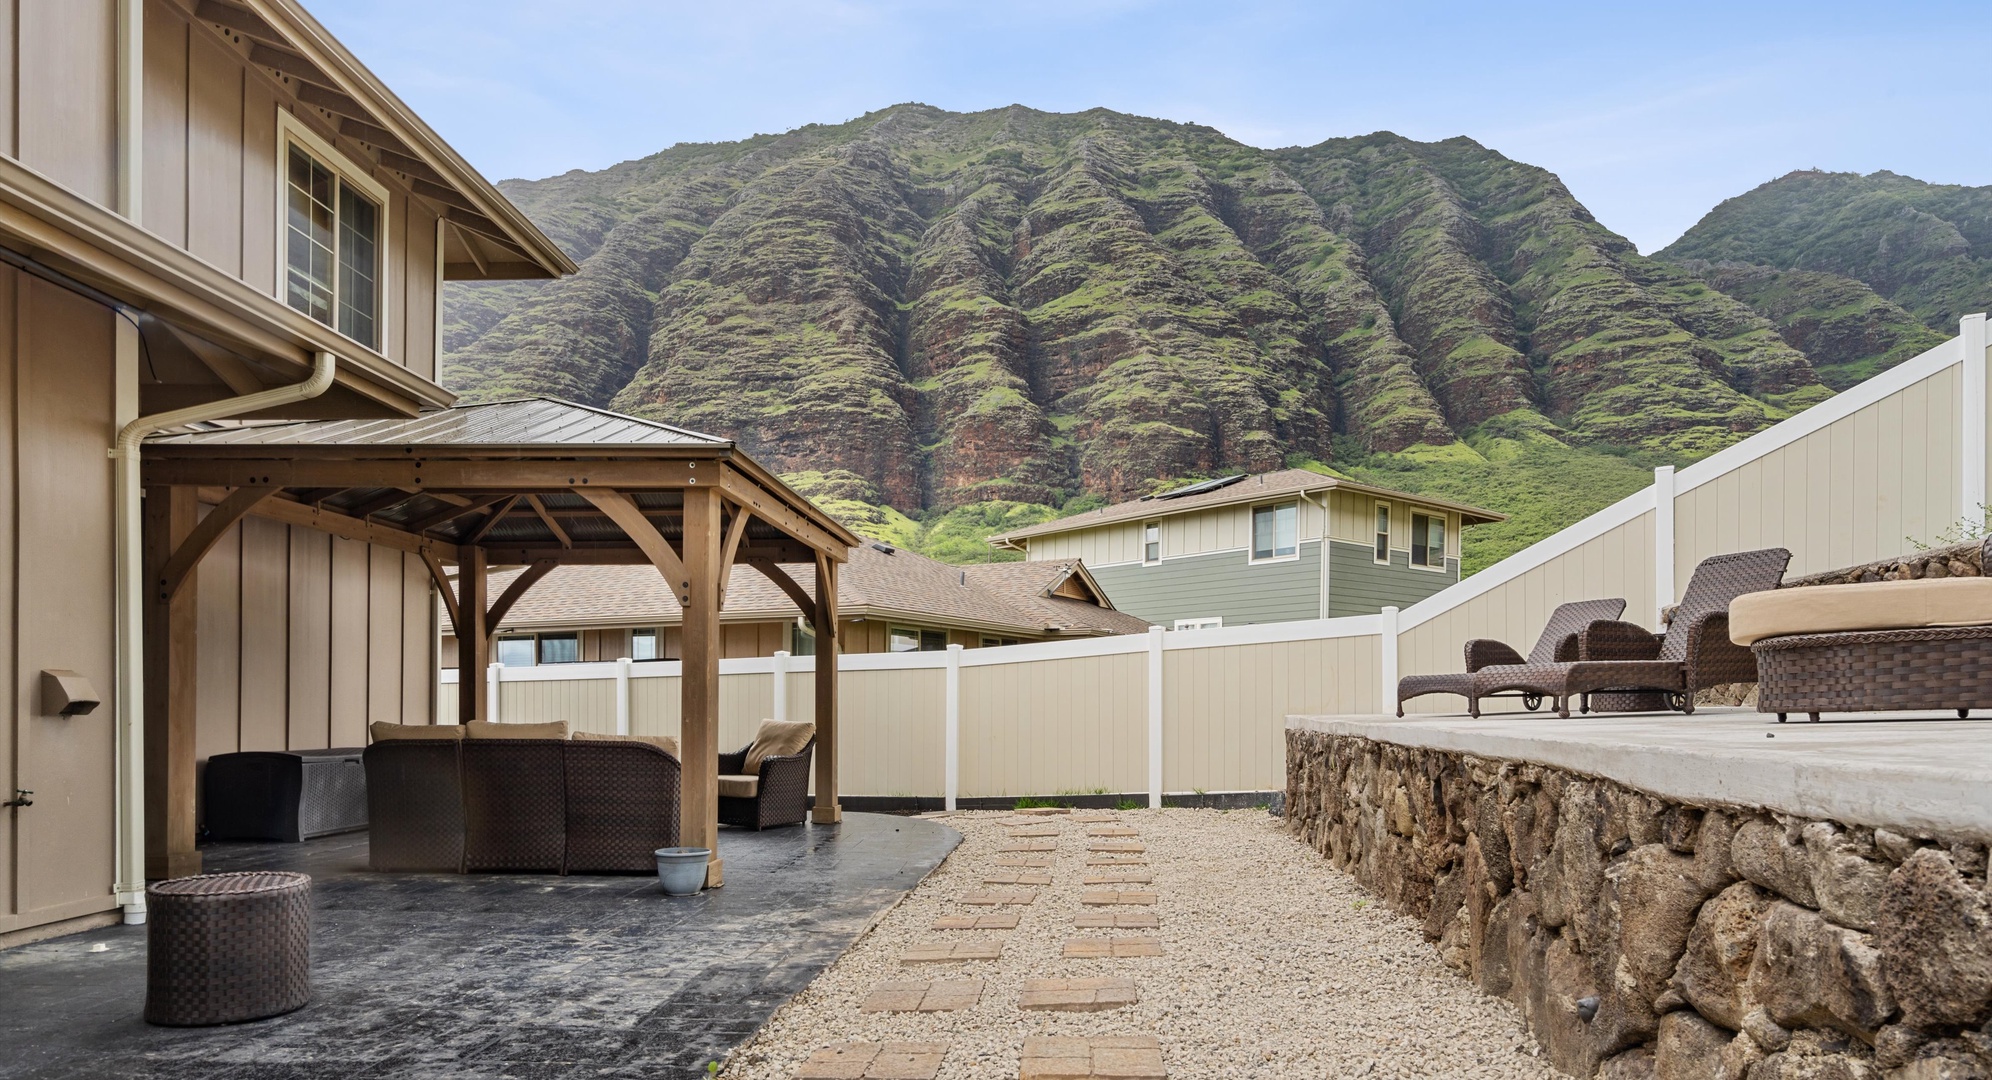 Waianae Vacation Rentals, Makaha Cottages Mauna Olu #76 - 3 - Sitting back between the tropical Waianae mountains will unlock total relaxation.